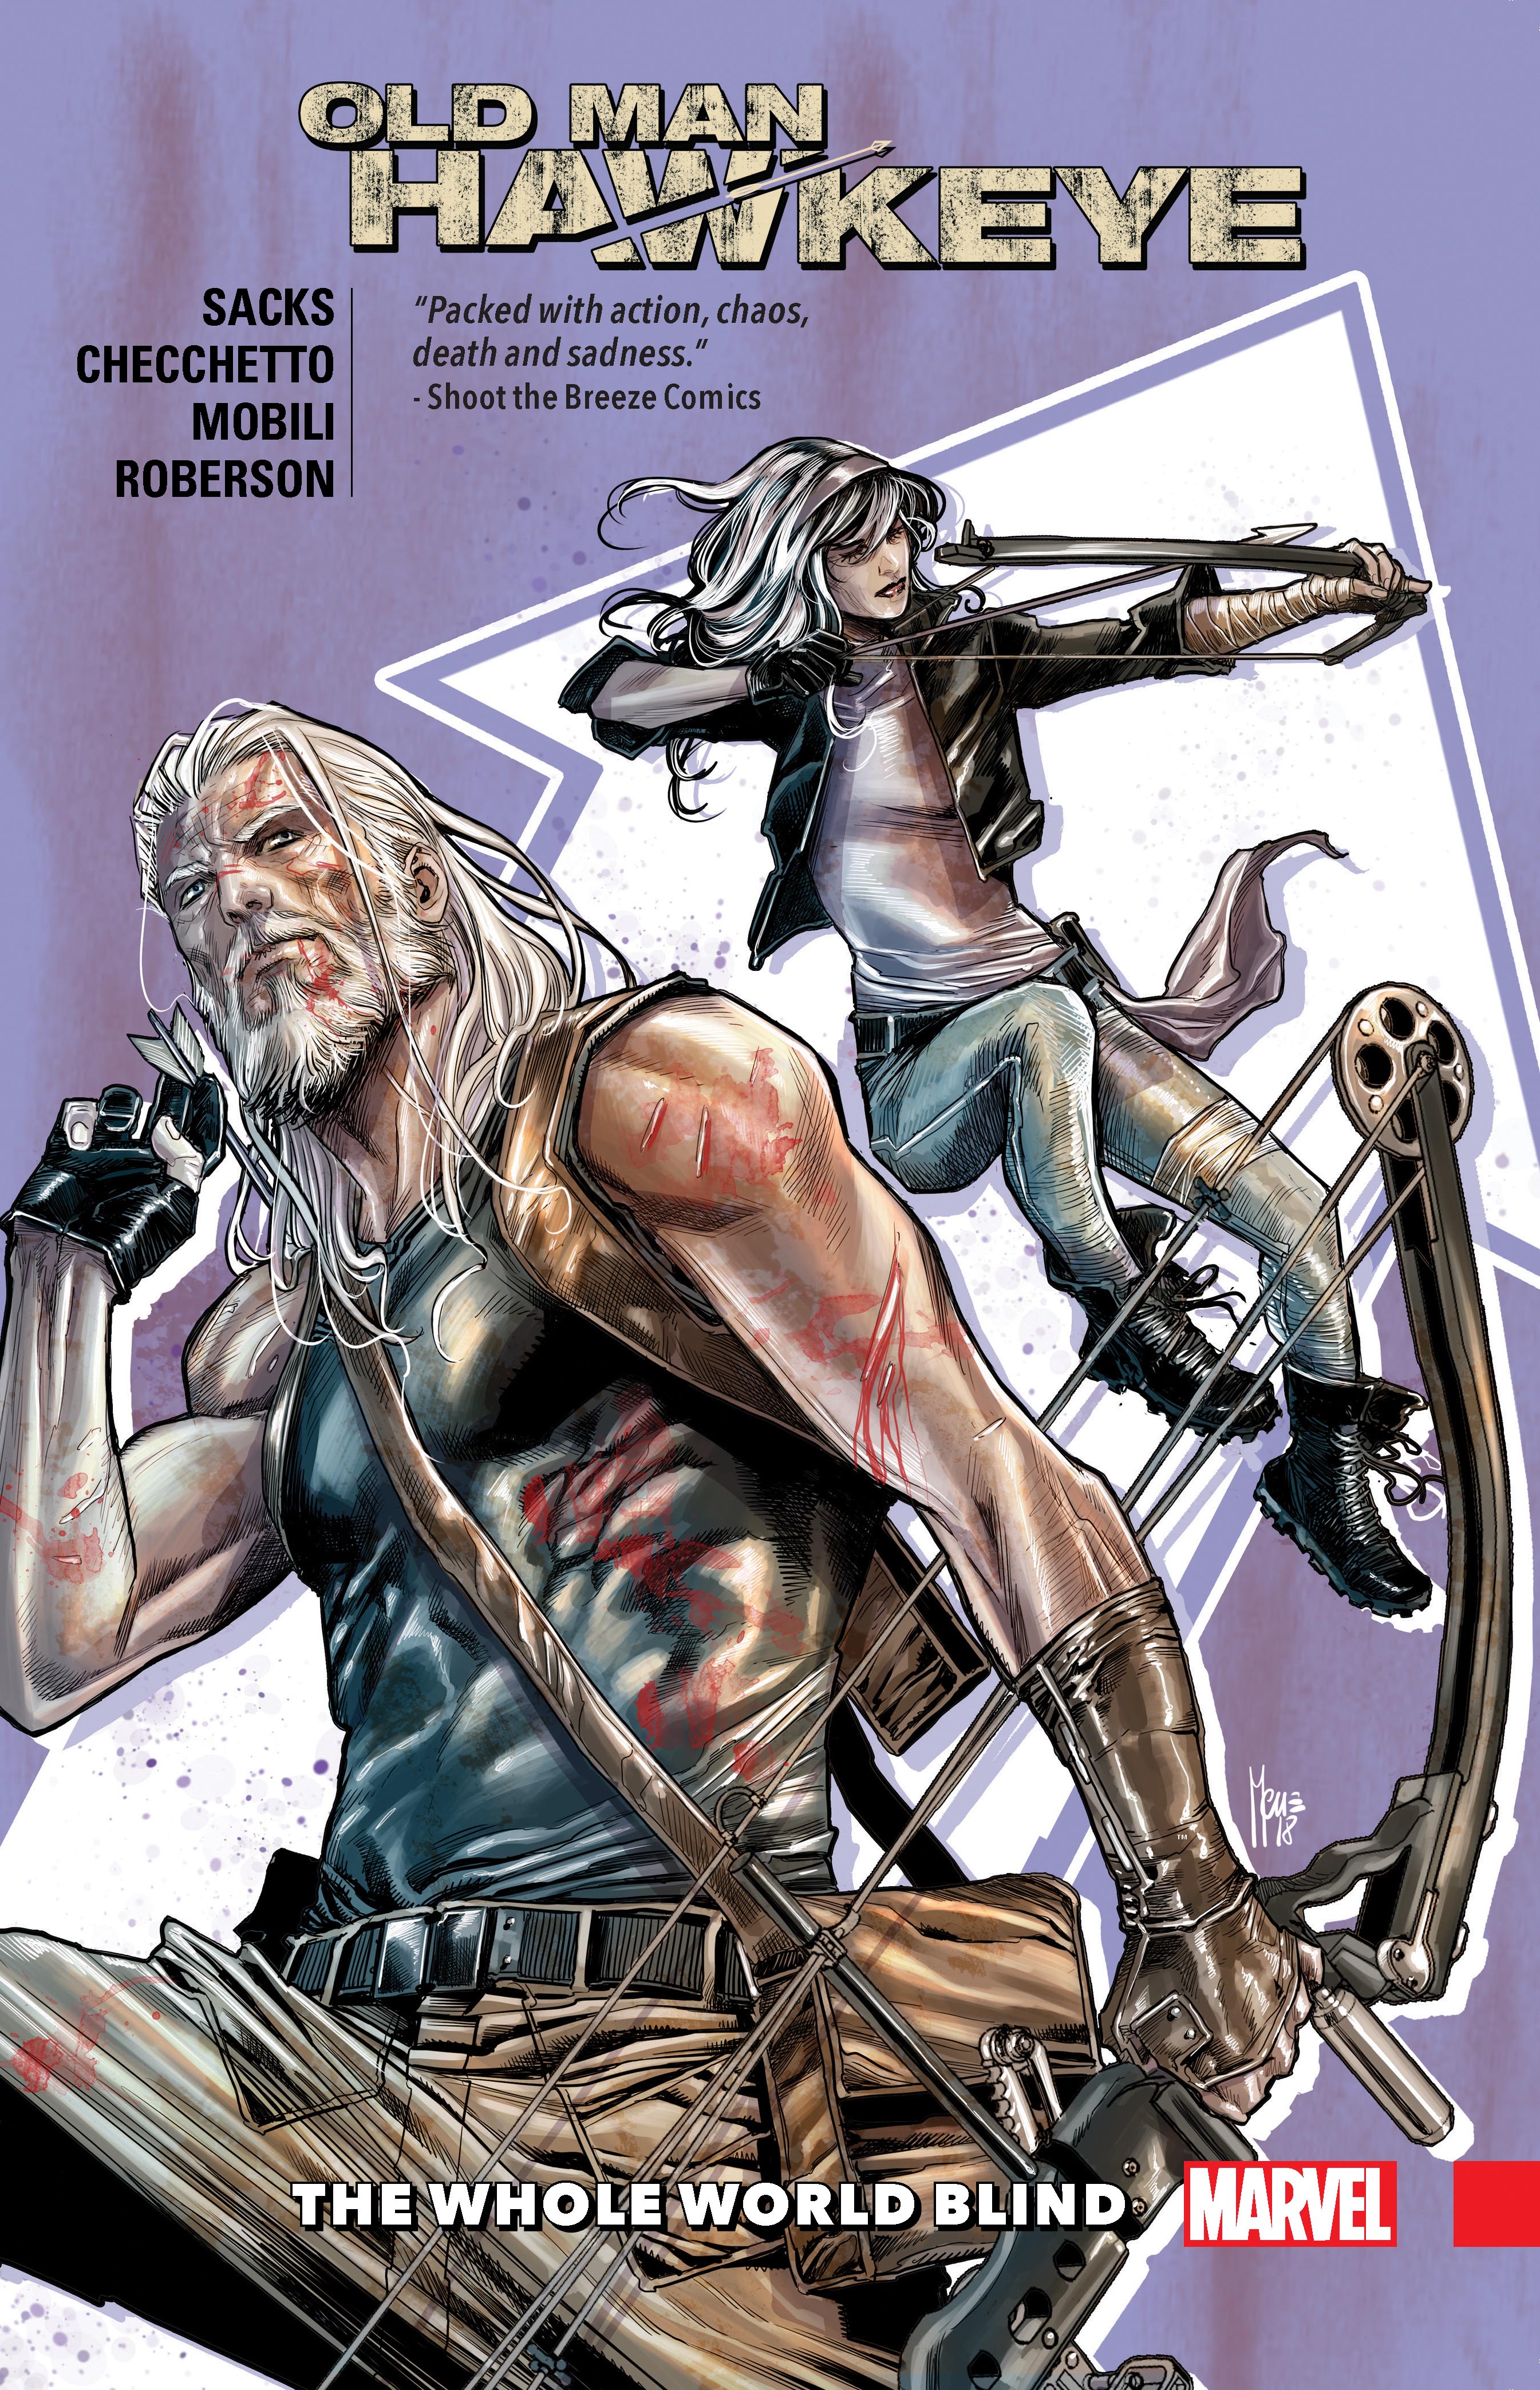 Old Man Hawkeye Vol. 2: The Whole World Blind  (Trade Paperback)